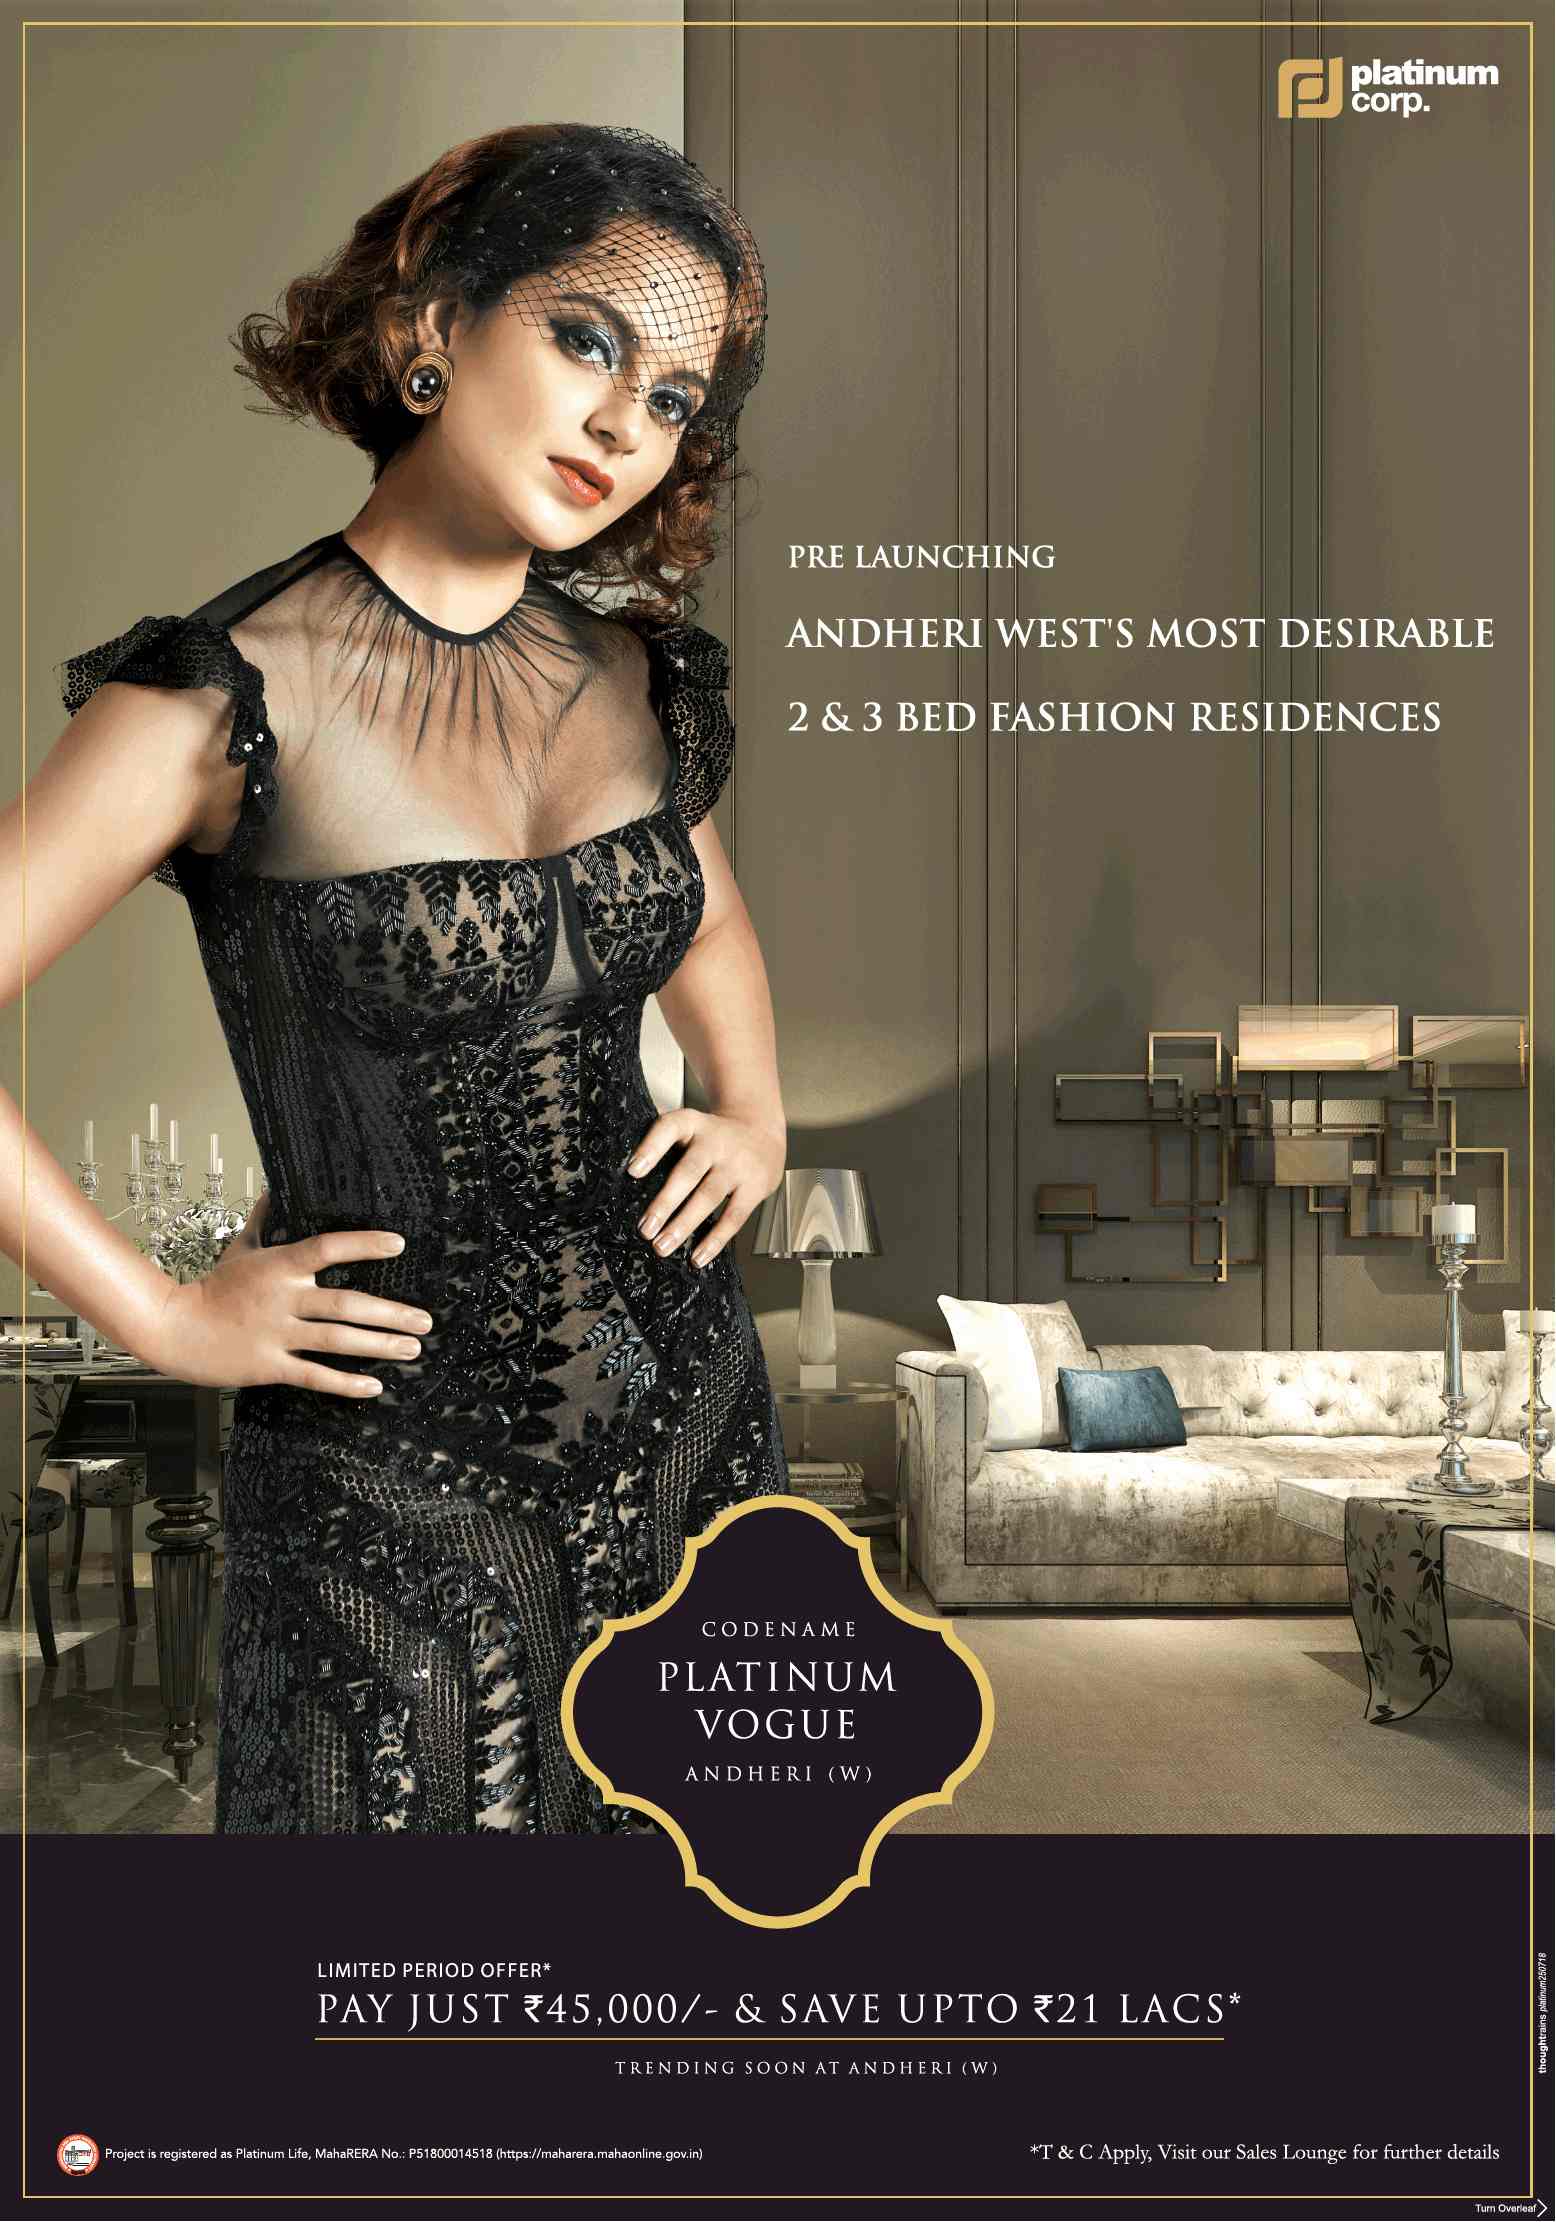 Pay just Rs. 45,000 & save up to Rs. 21 Lacs at Platinum Vogue in Mumbai